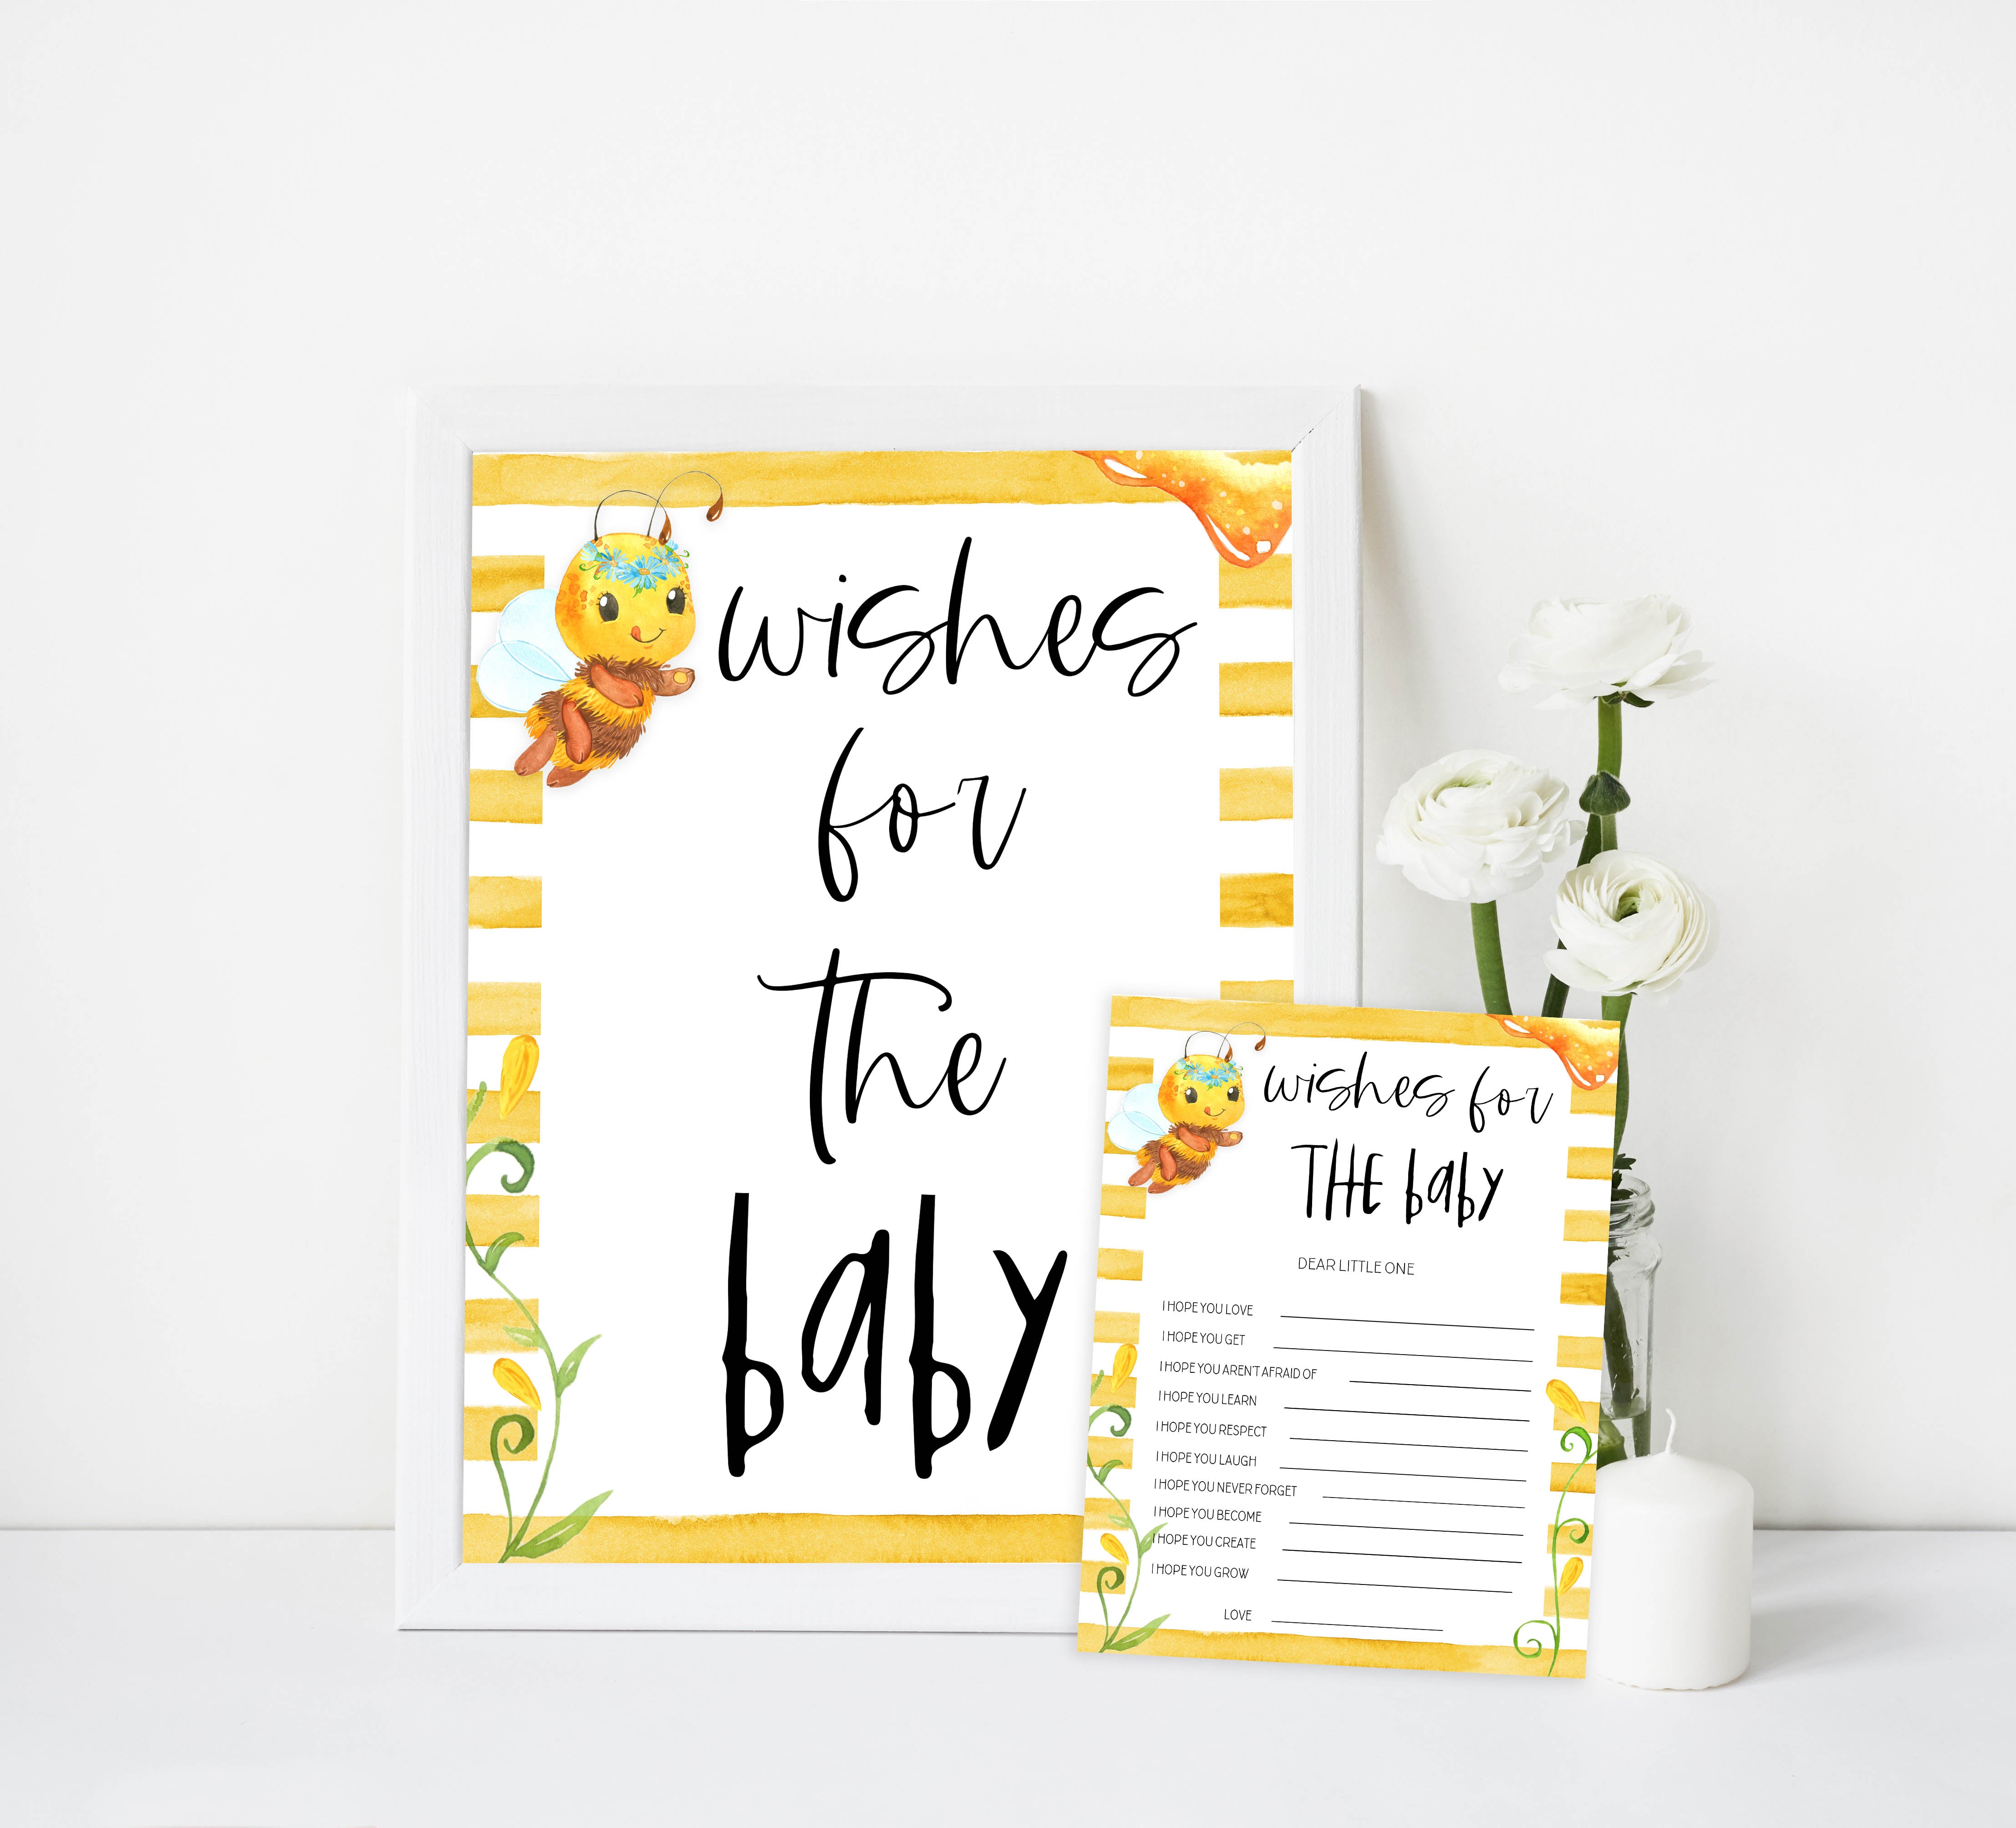 wishes for the baby game, Printable baby shower games, mommy bee fun baby games, baby shower games, fun baby shower ideas, top baby shower ideas, mommy to bee baby shower, friends baby shower ideas